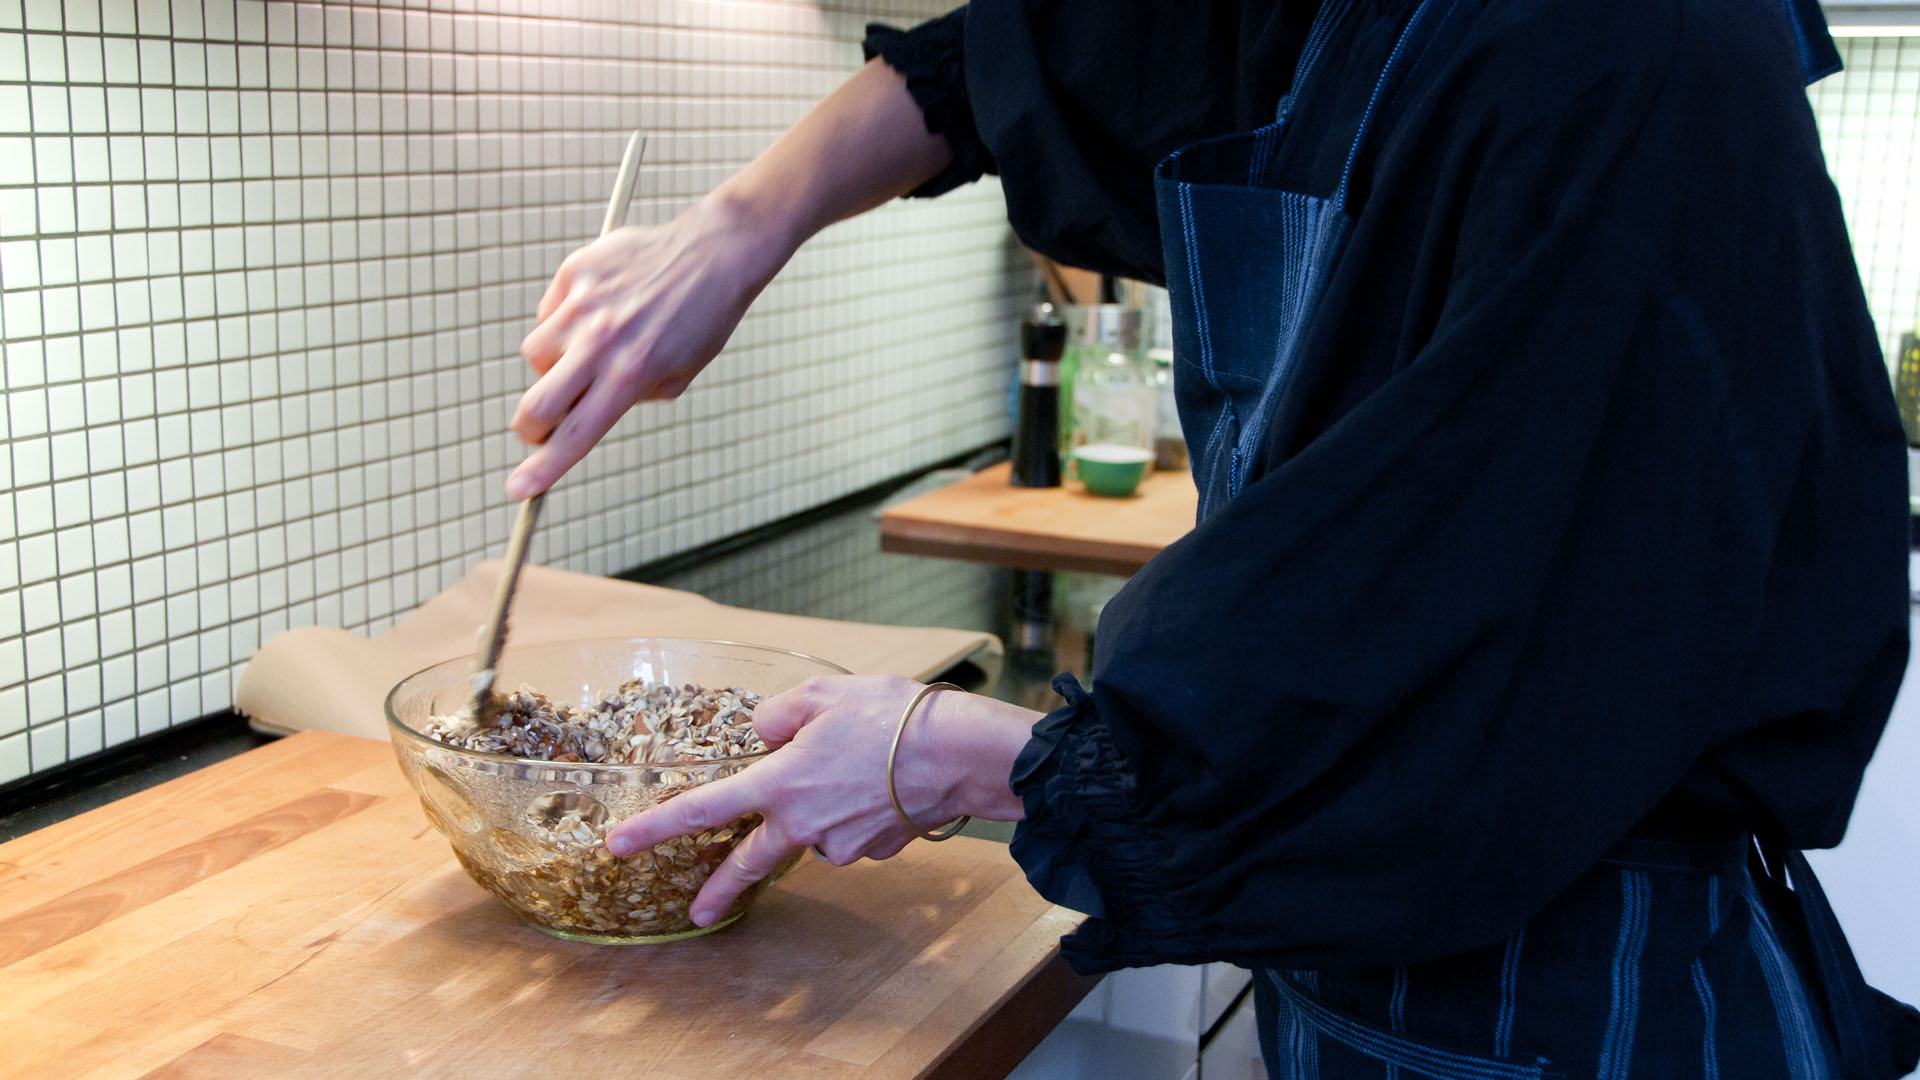 Carlin Greenstein shares her recipe for Manu's Granola with Foodadit